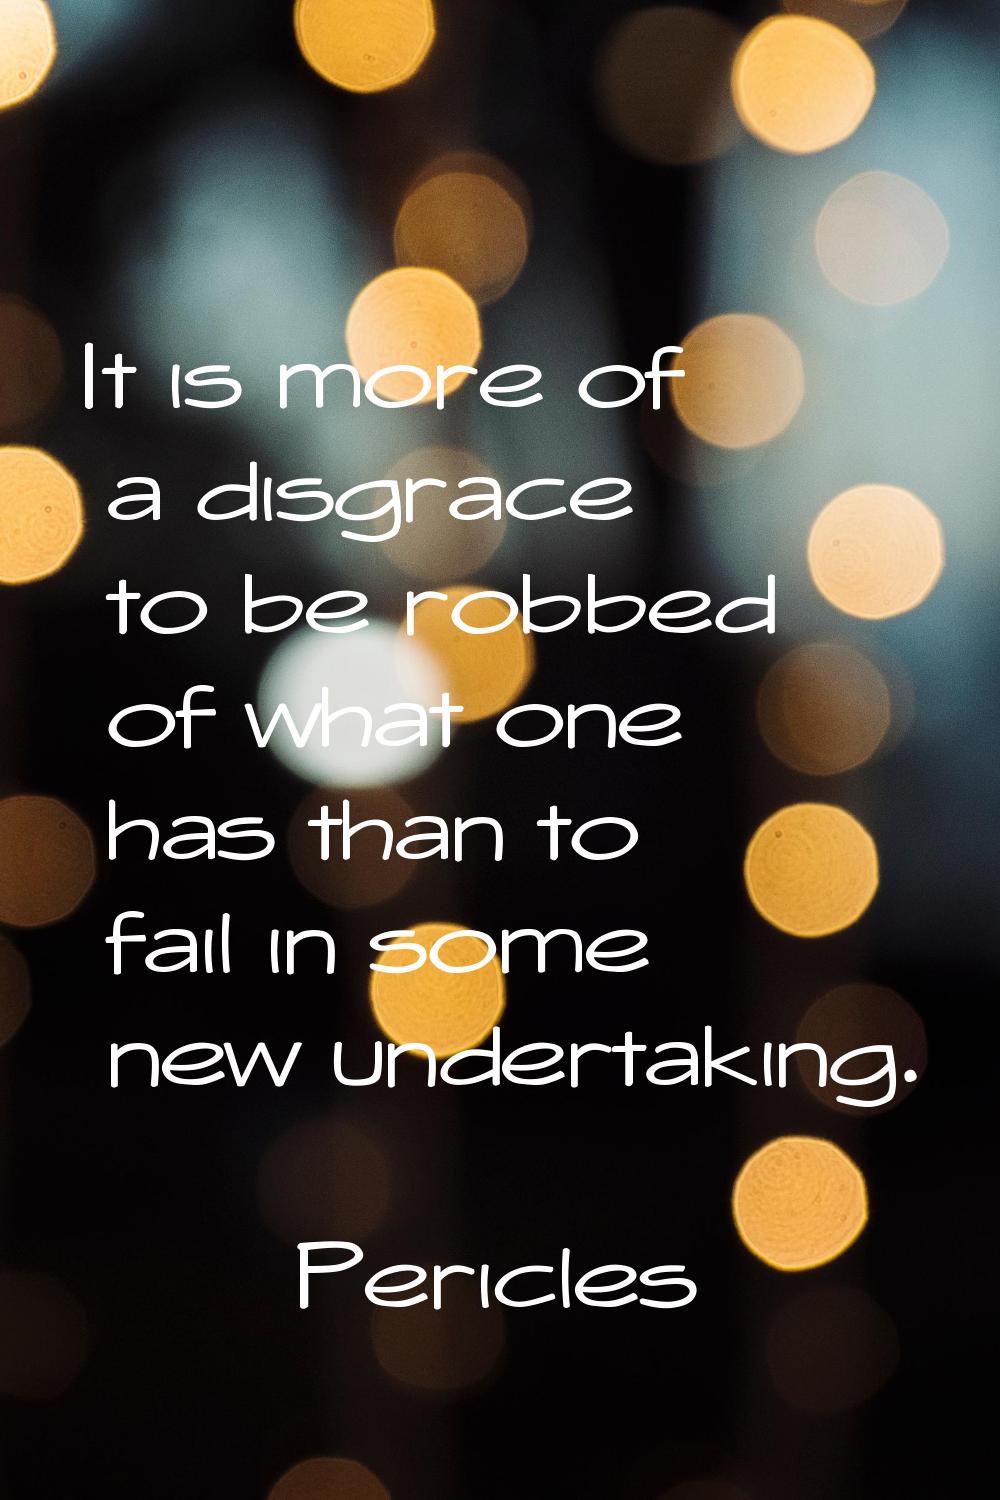 It is more of a disgrace to be robbed of what one has than to fail in some new undertaking.